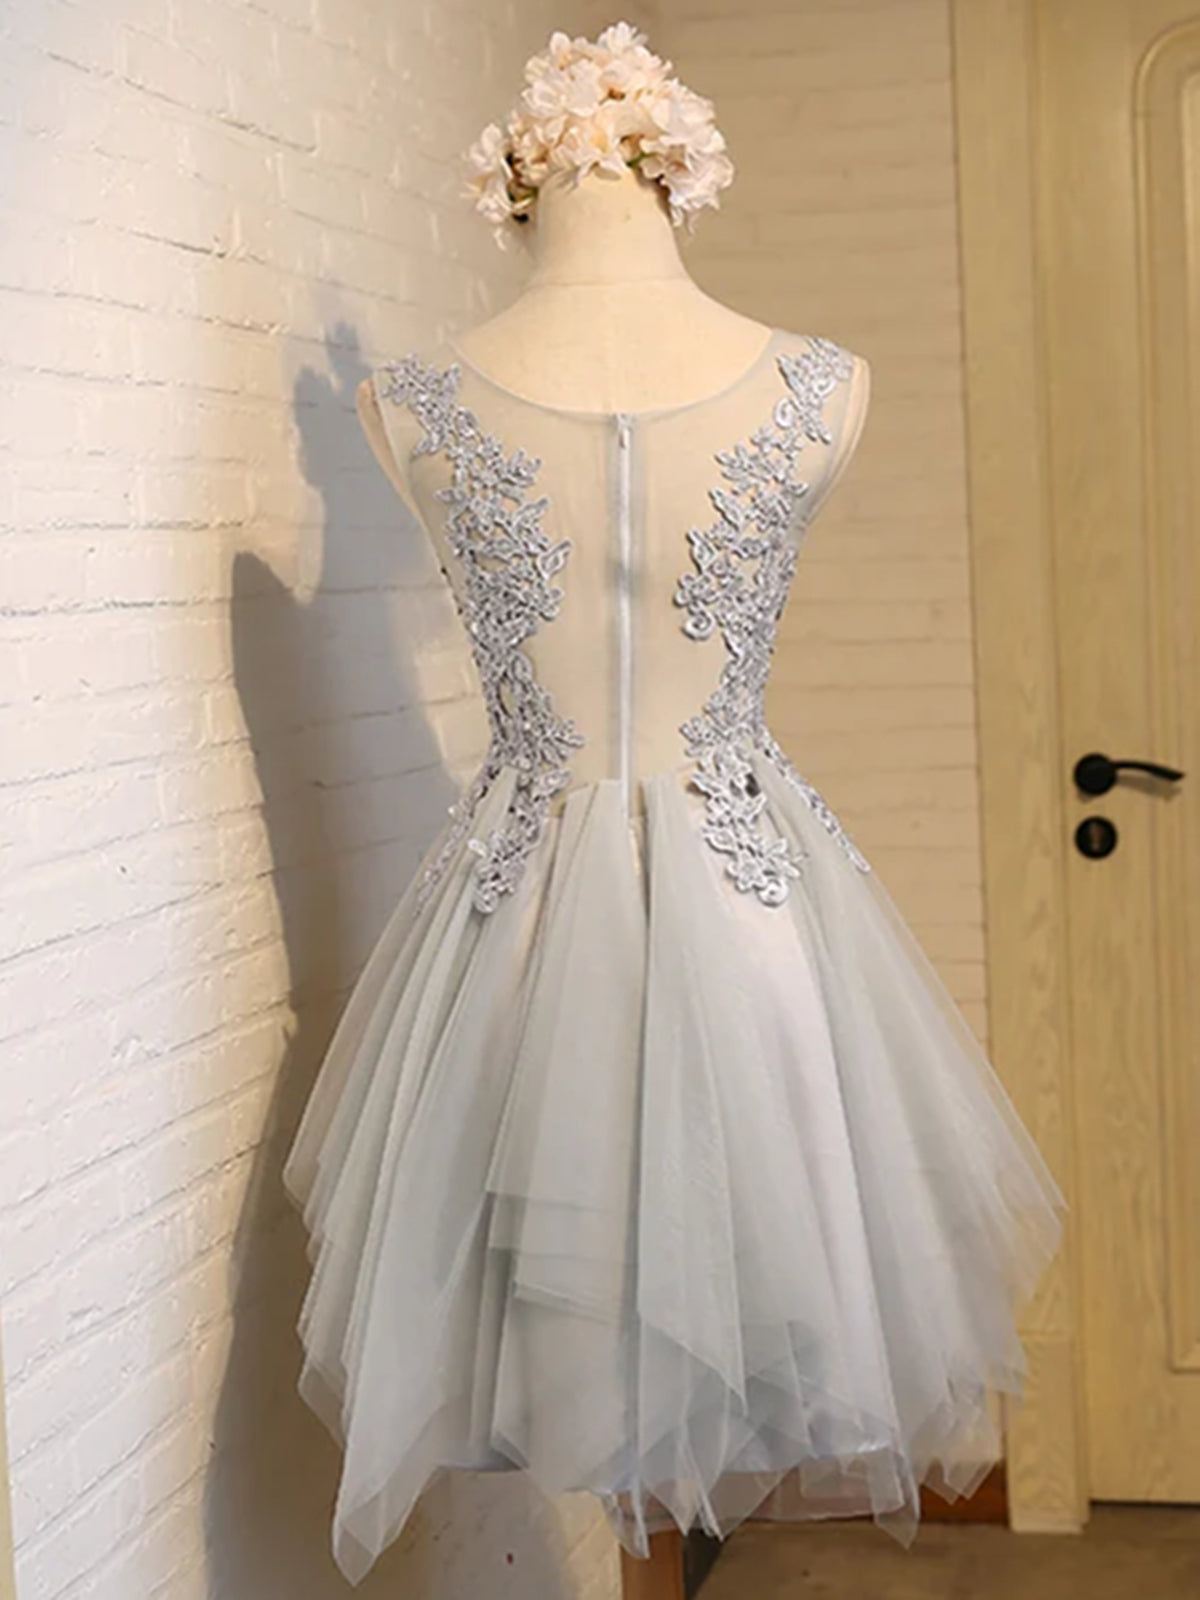 Fall Wedding Ideas, Round Neck Short Gray Lace Prom Dresses, Short Grey Lace Homecoming Dresses